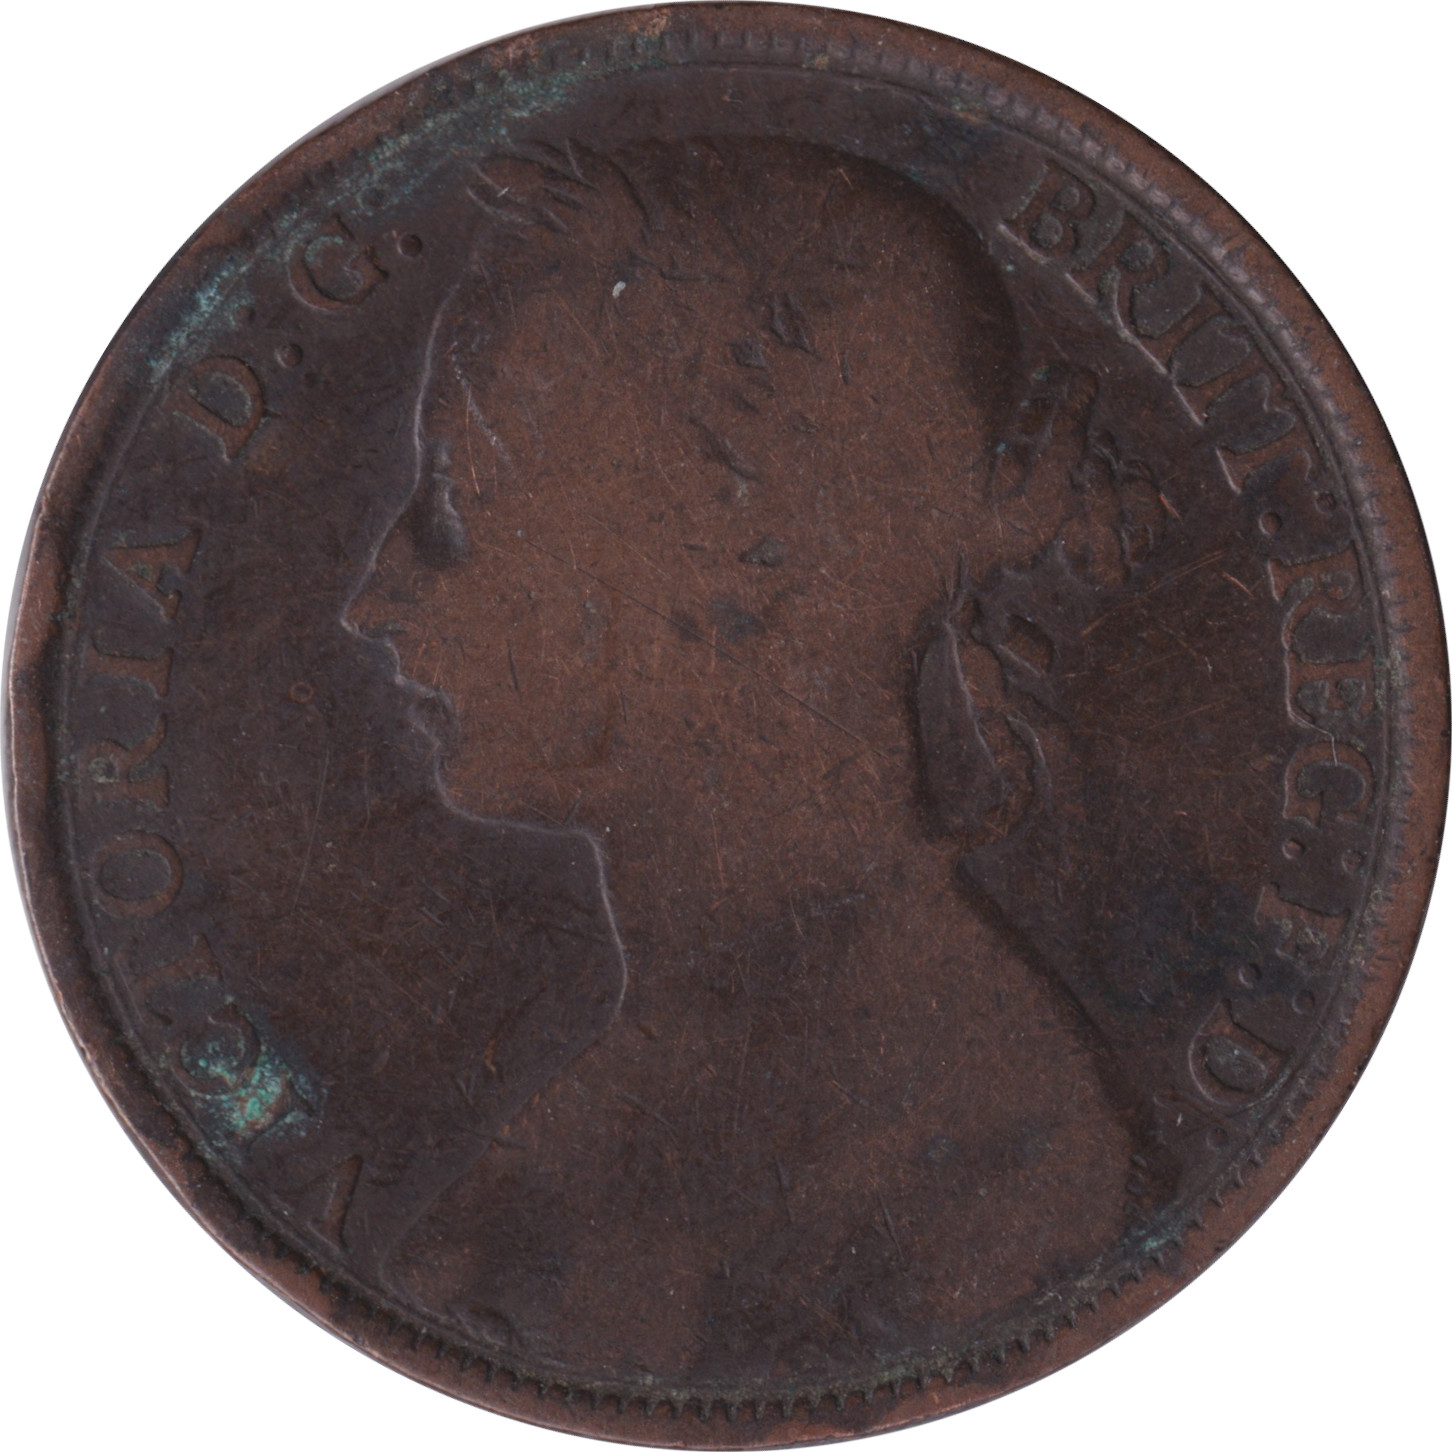 1 penny - Victoria - Mature bust